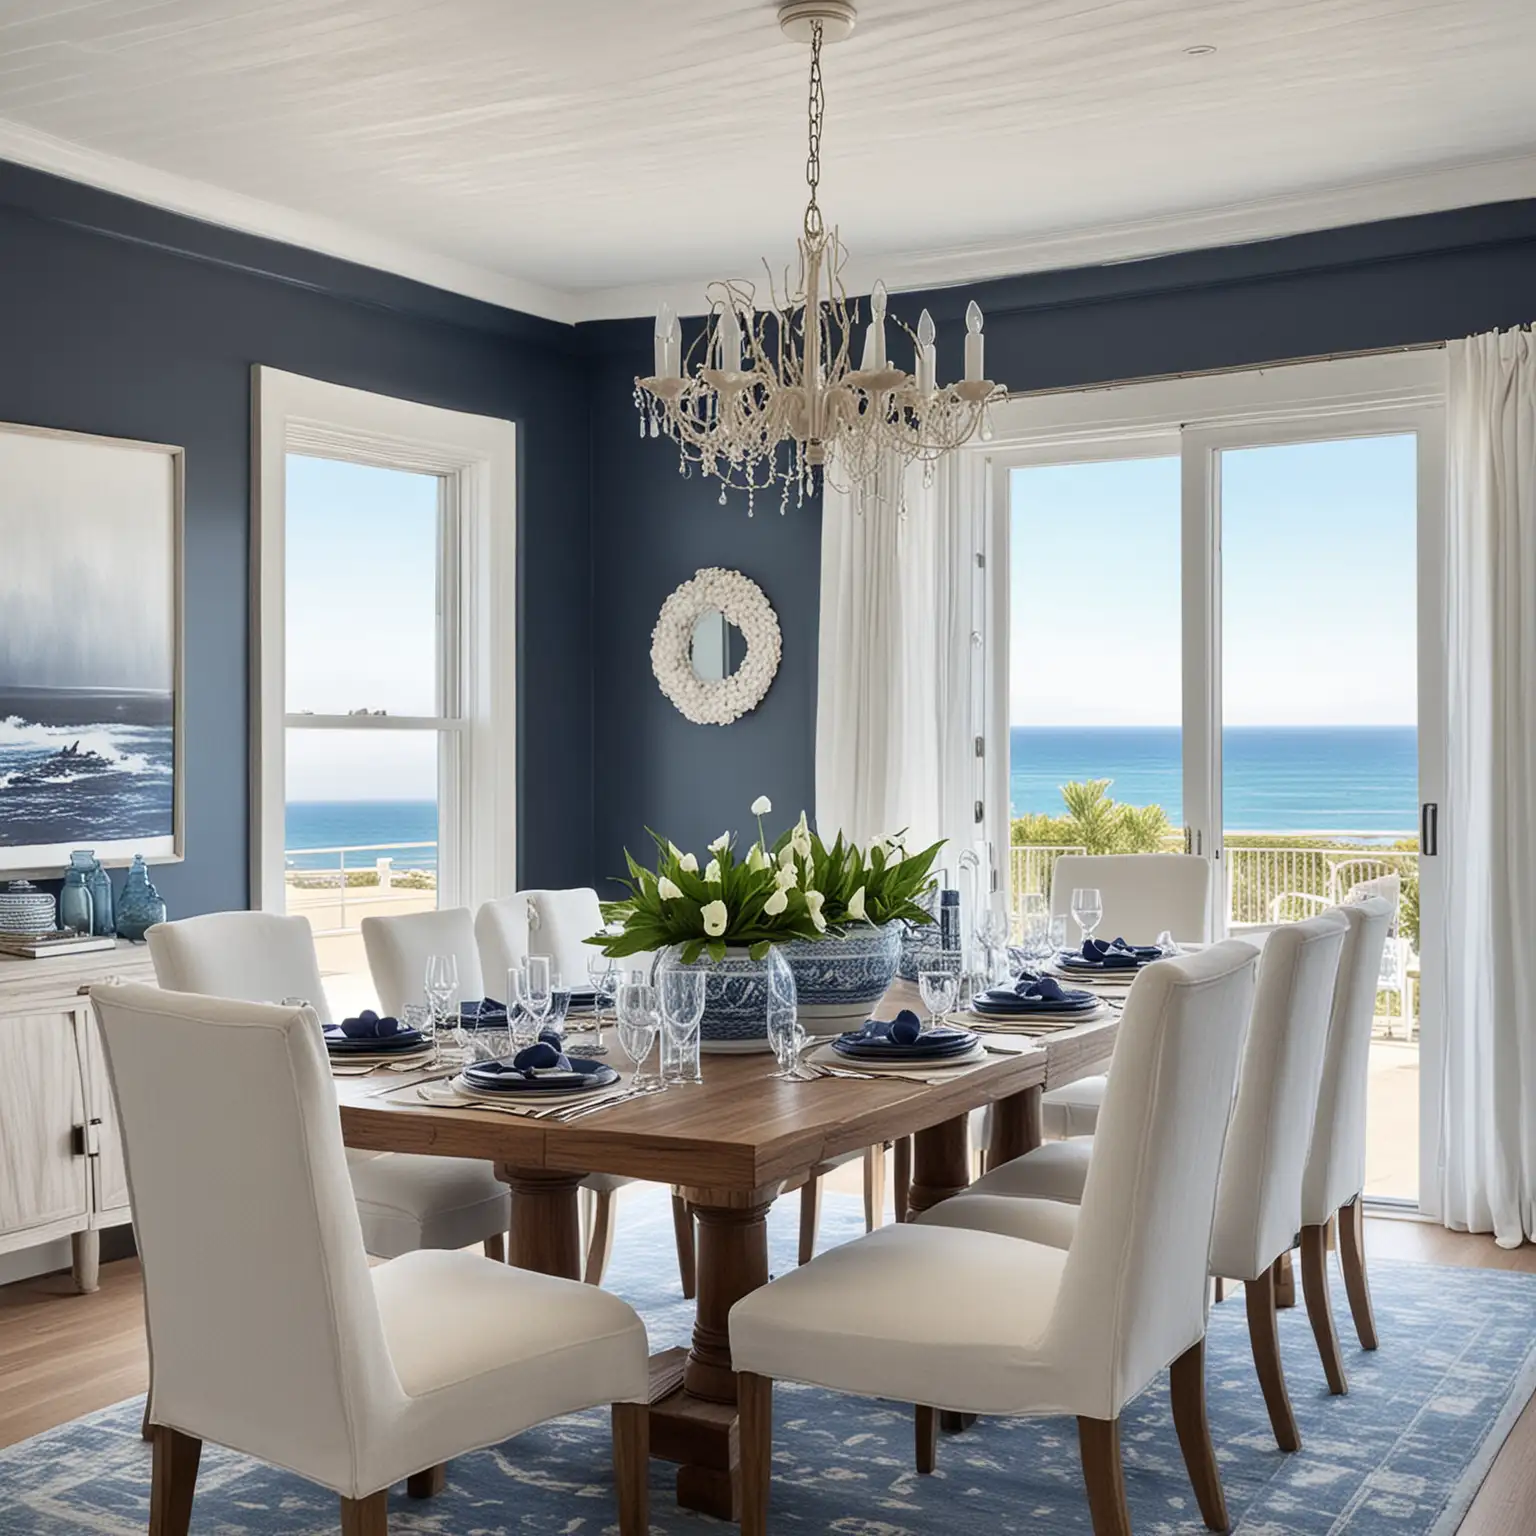 Elegant Navy and White Coastal Dining Room with Spectacular Ocean View